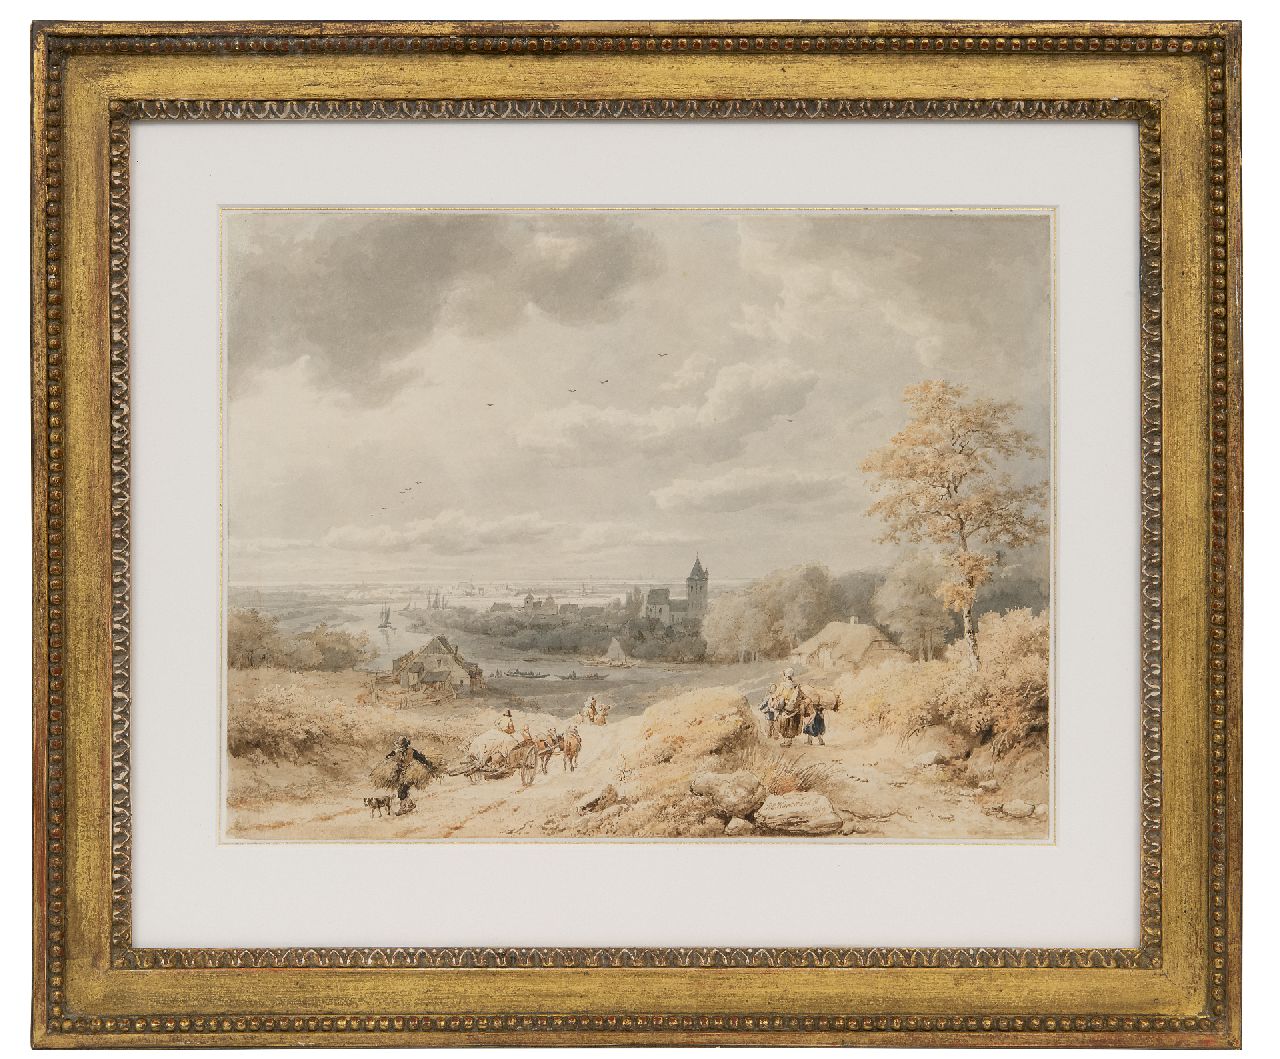 Koekkoek B.C.  | Barend Cornelis Koekkoek, A view of the river Rhine near Kleve, pen, brush and ink on paper 23.5 x 31.1 cm, signed l.c. and dated 1849